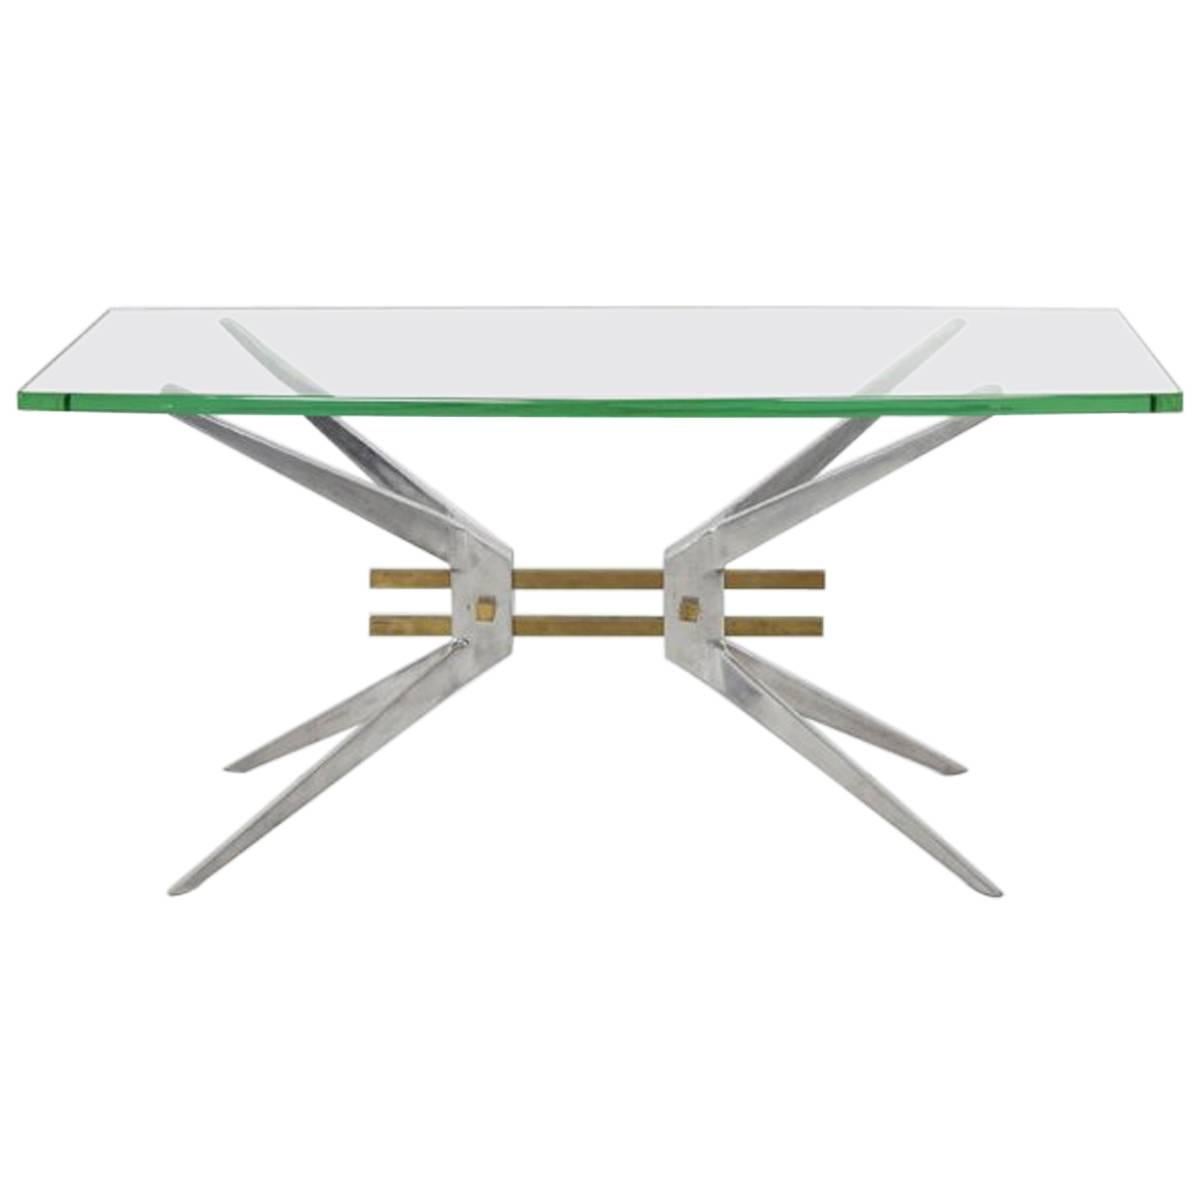 Italian Sofa Table with Aluminum Base and Glass top, 1960s For Sale